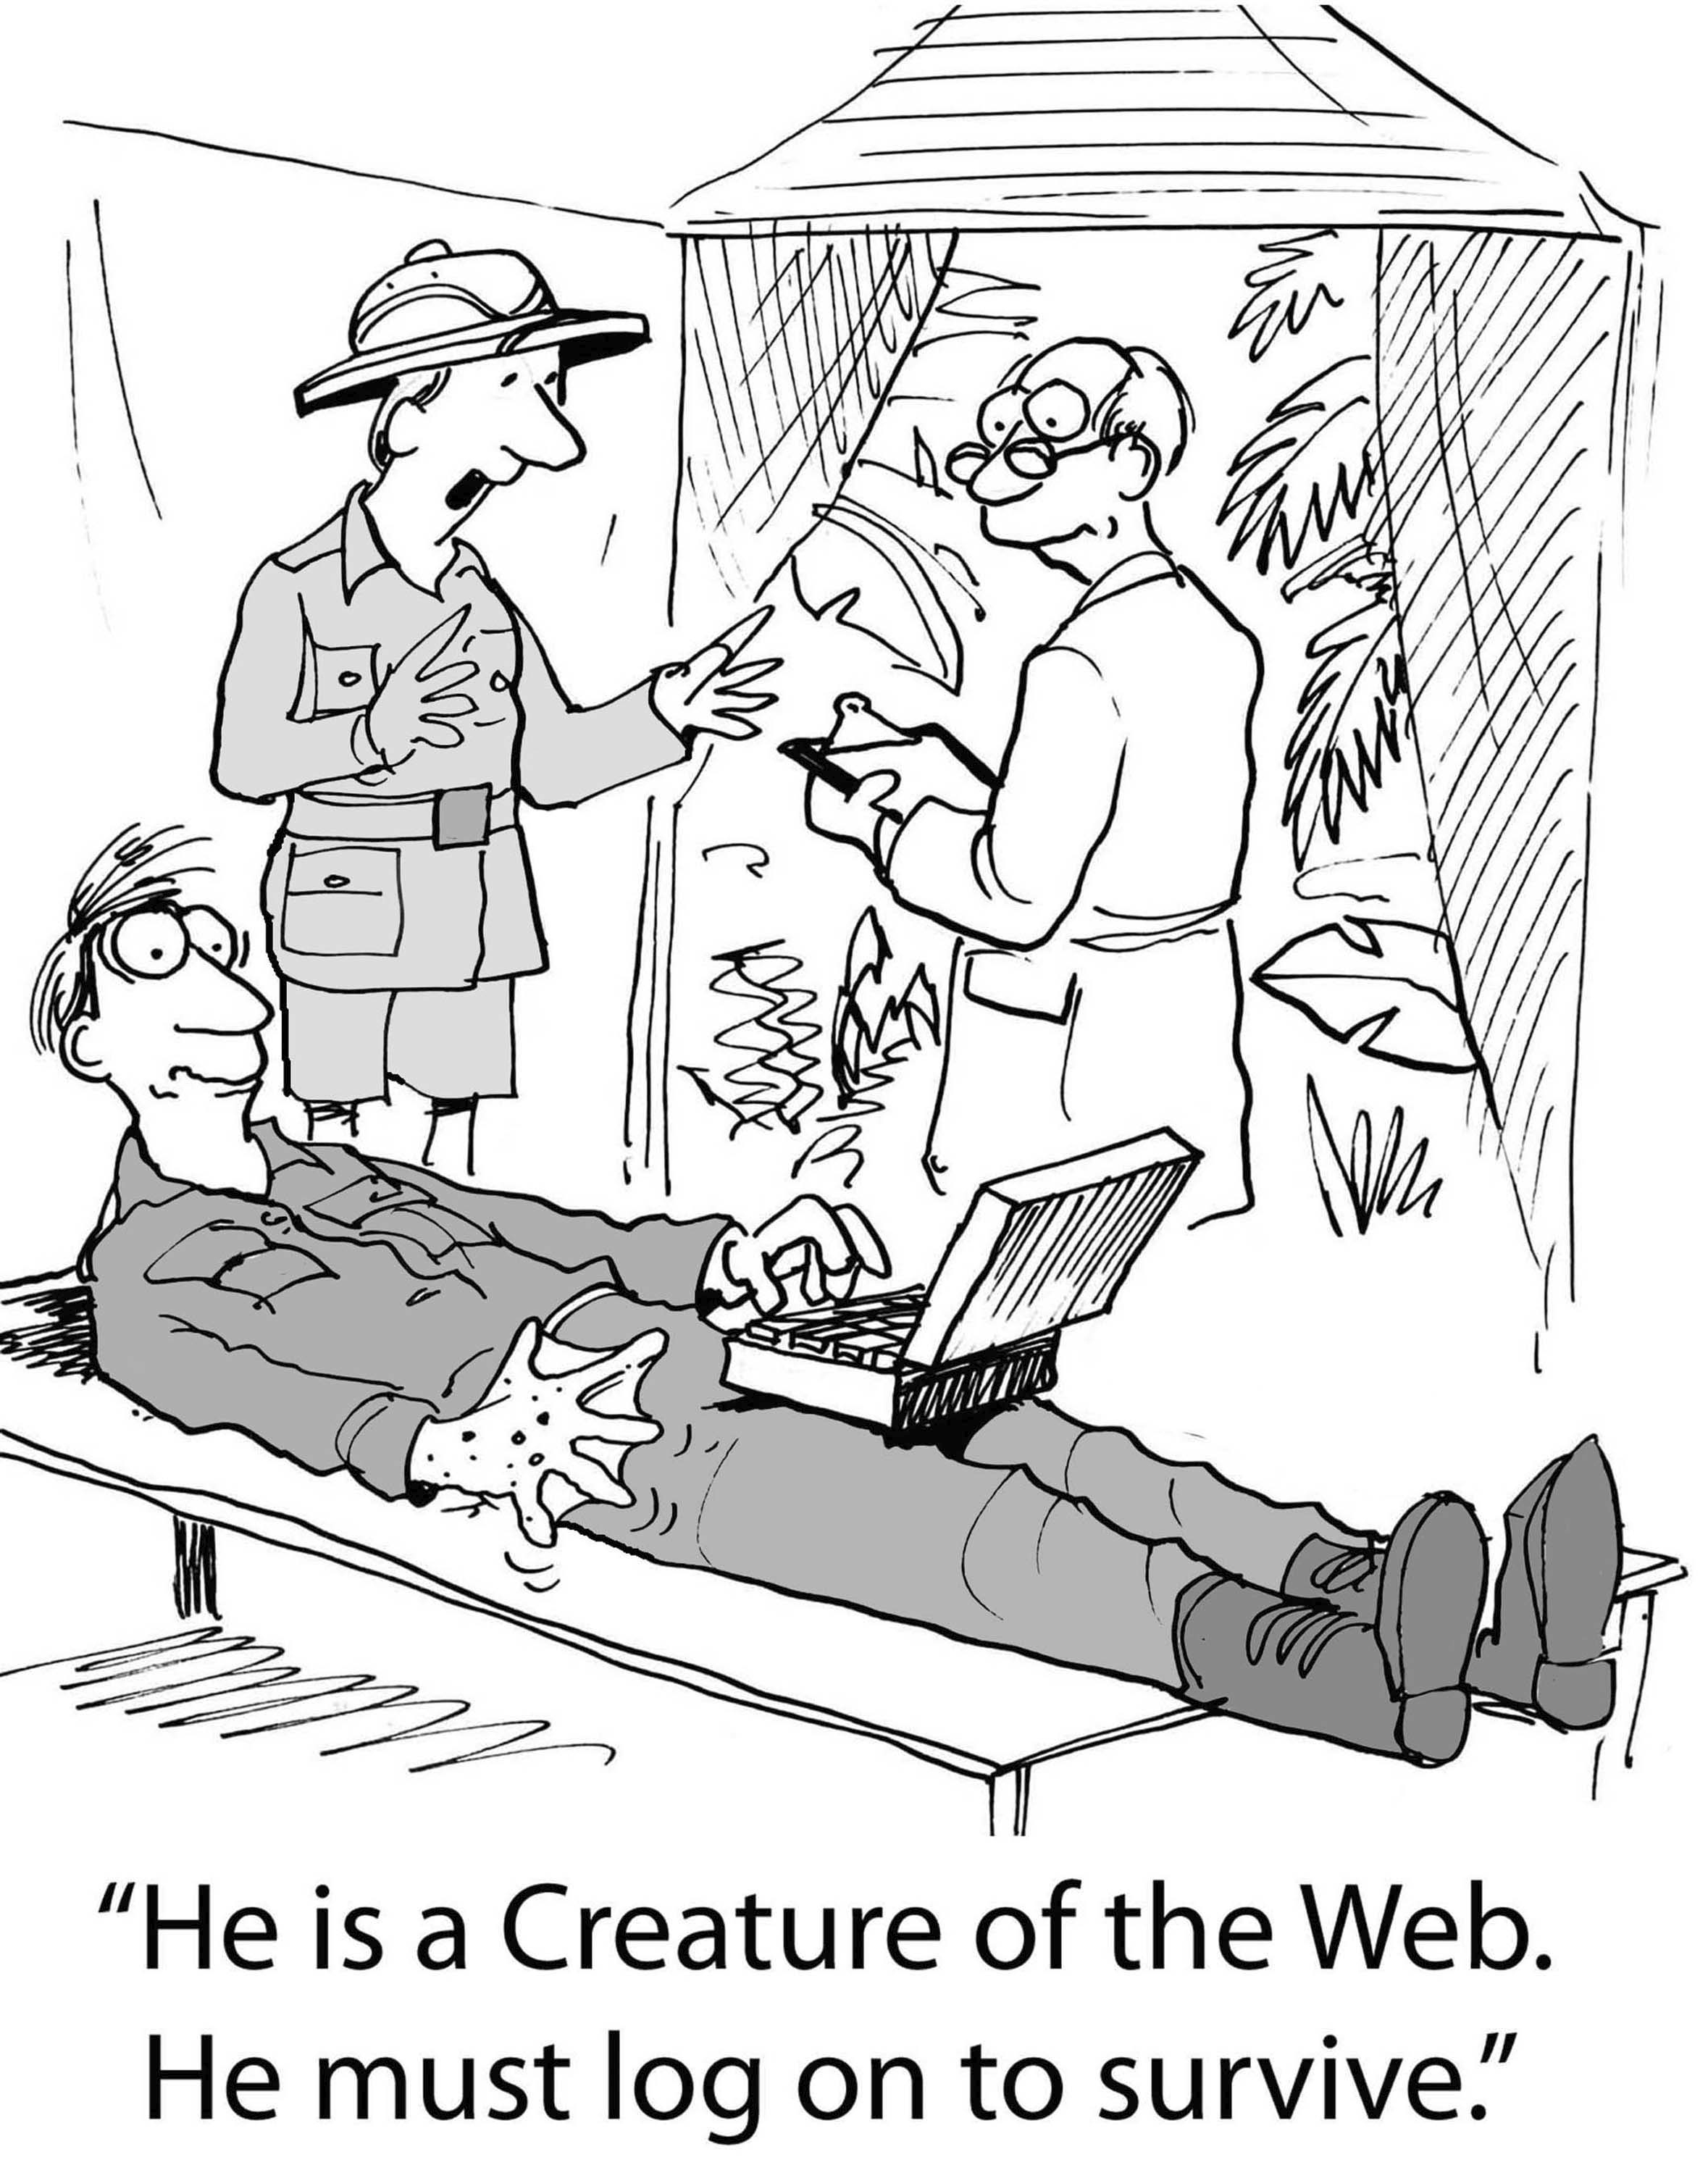 "He is a creature of the web. He must log on to survive."